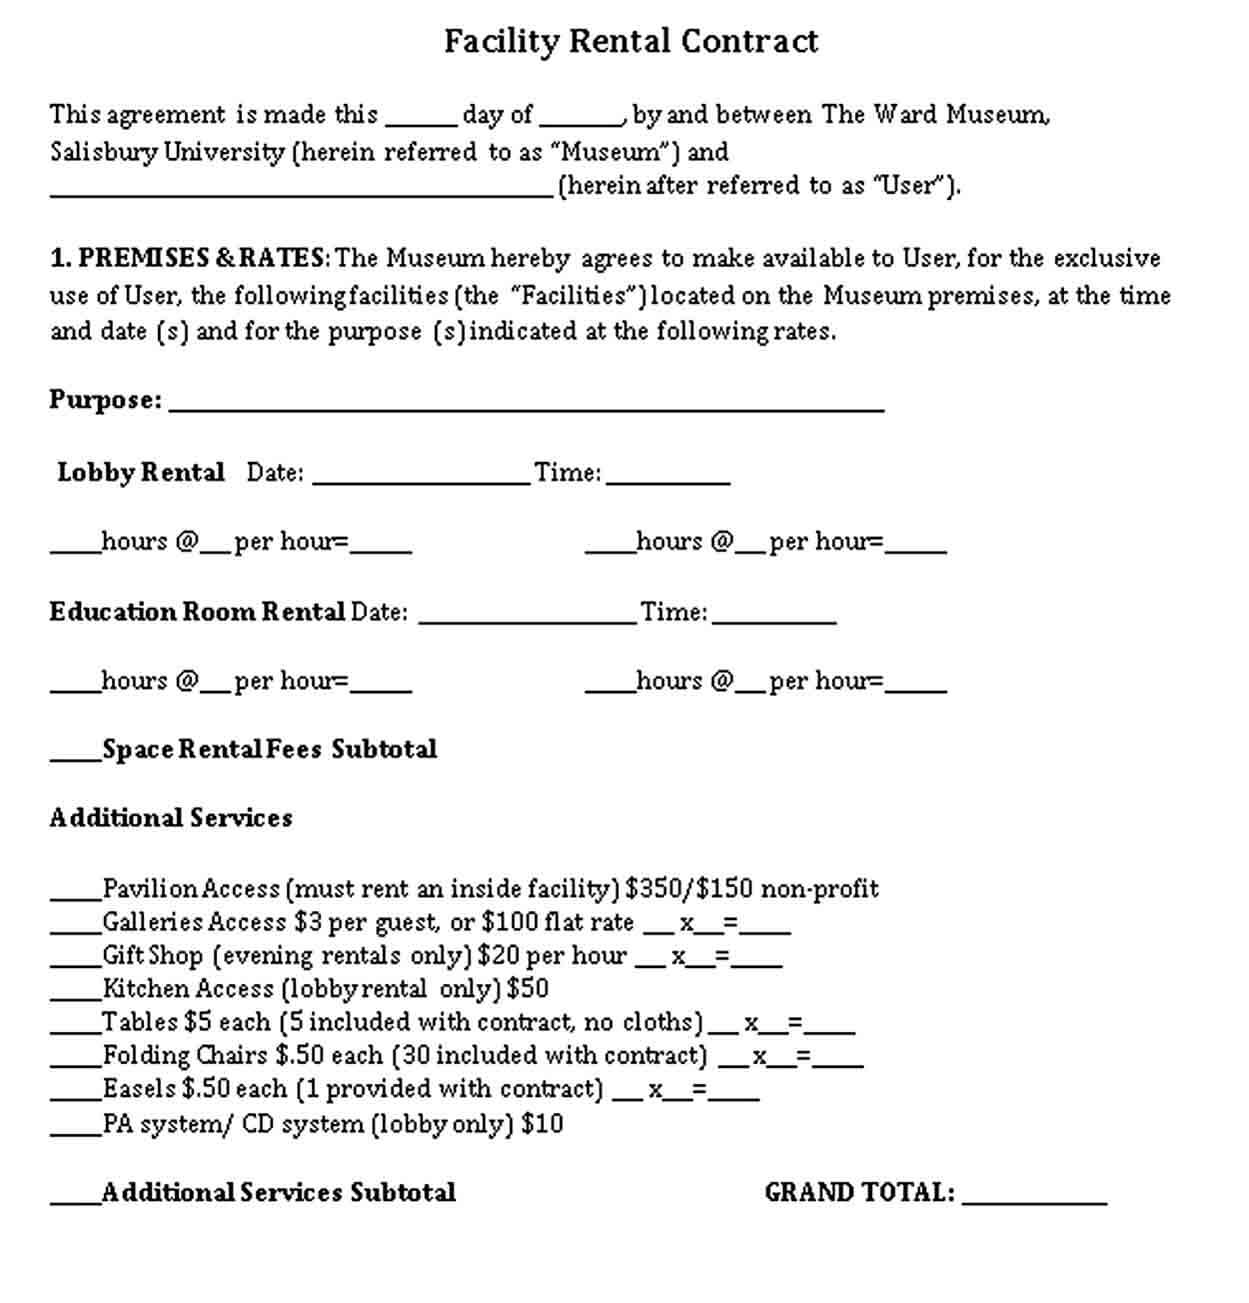 Sample Facility Rental Contract